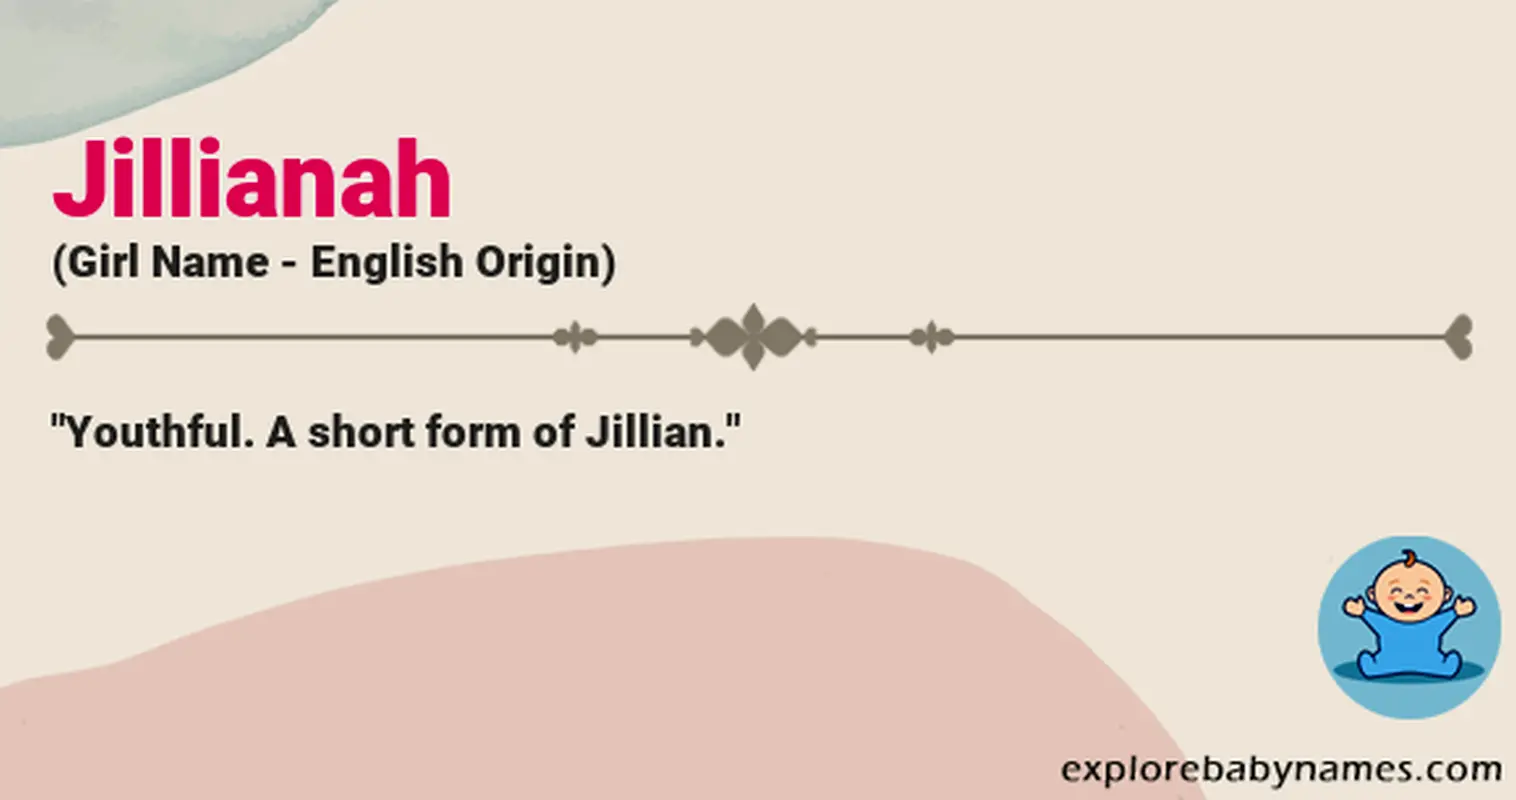 Meaning of Jillianah